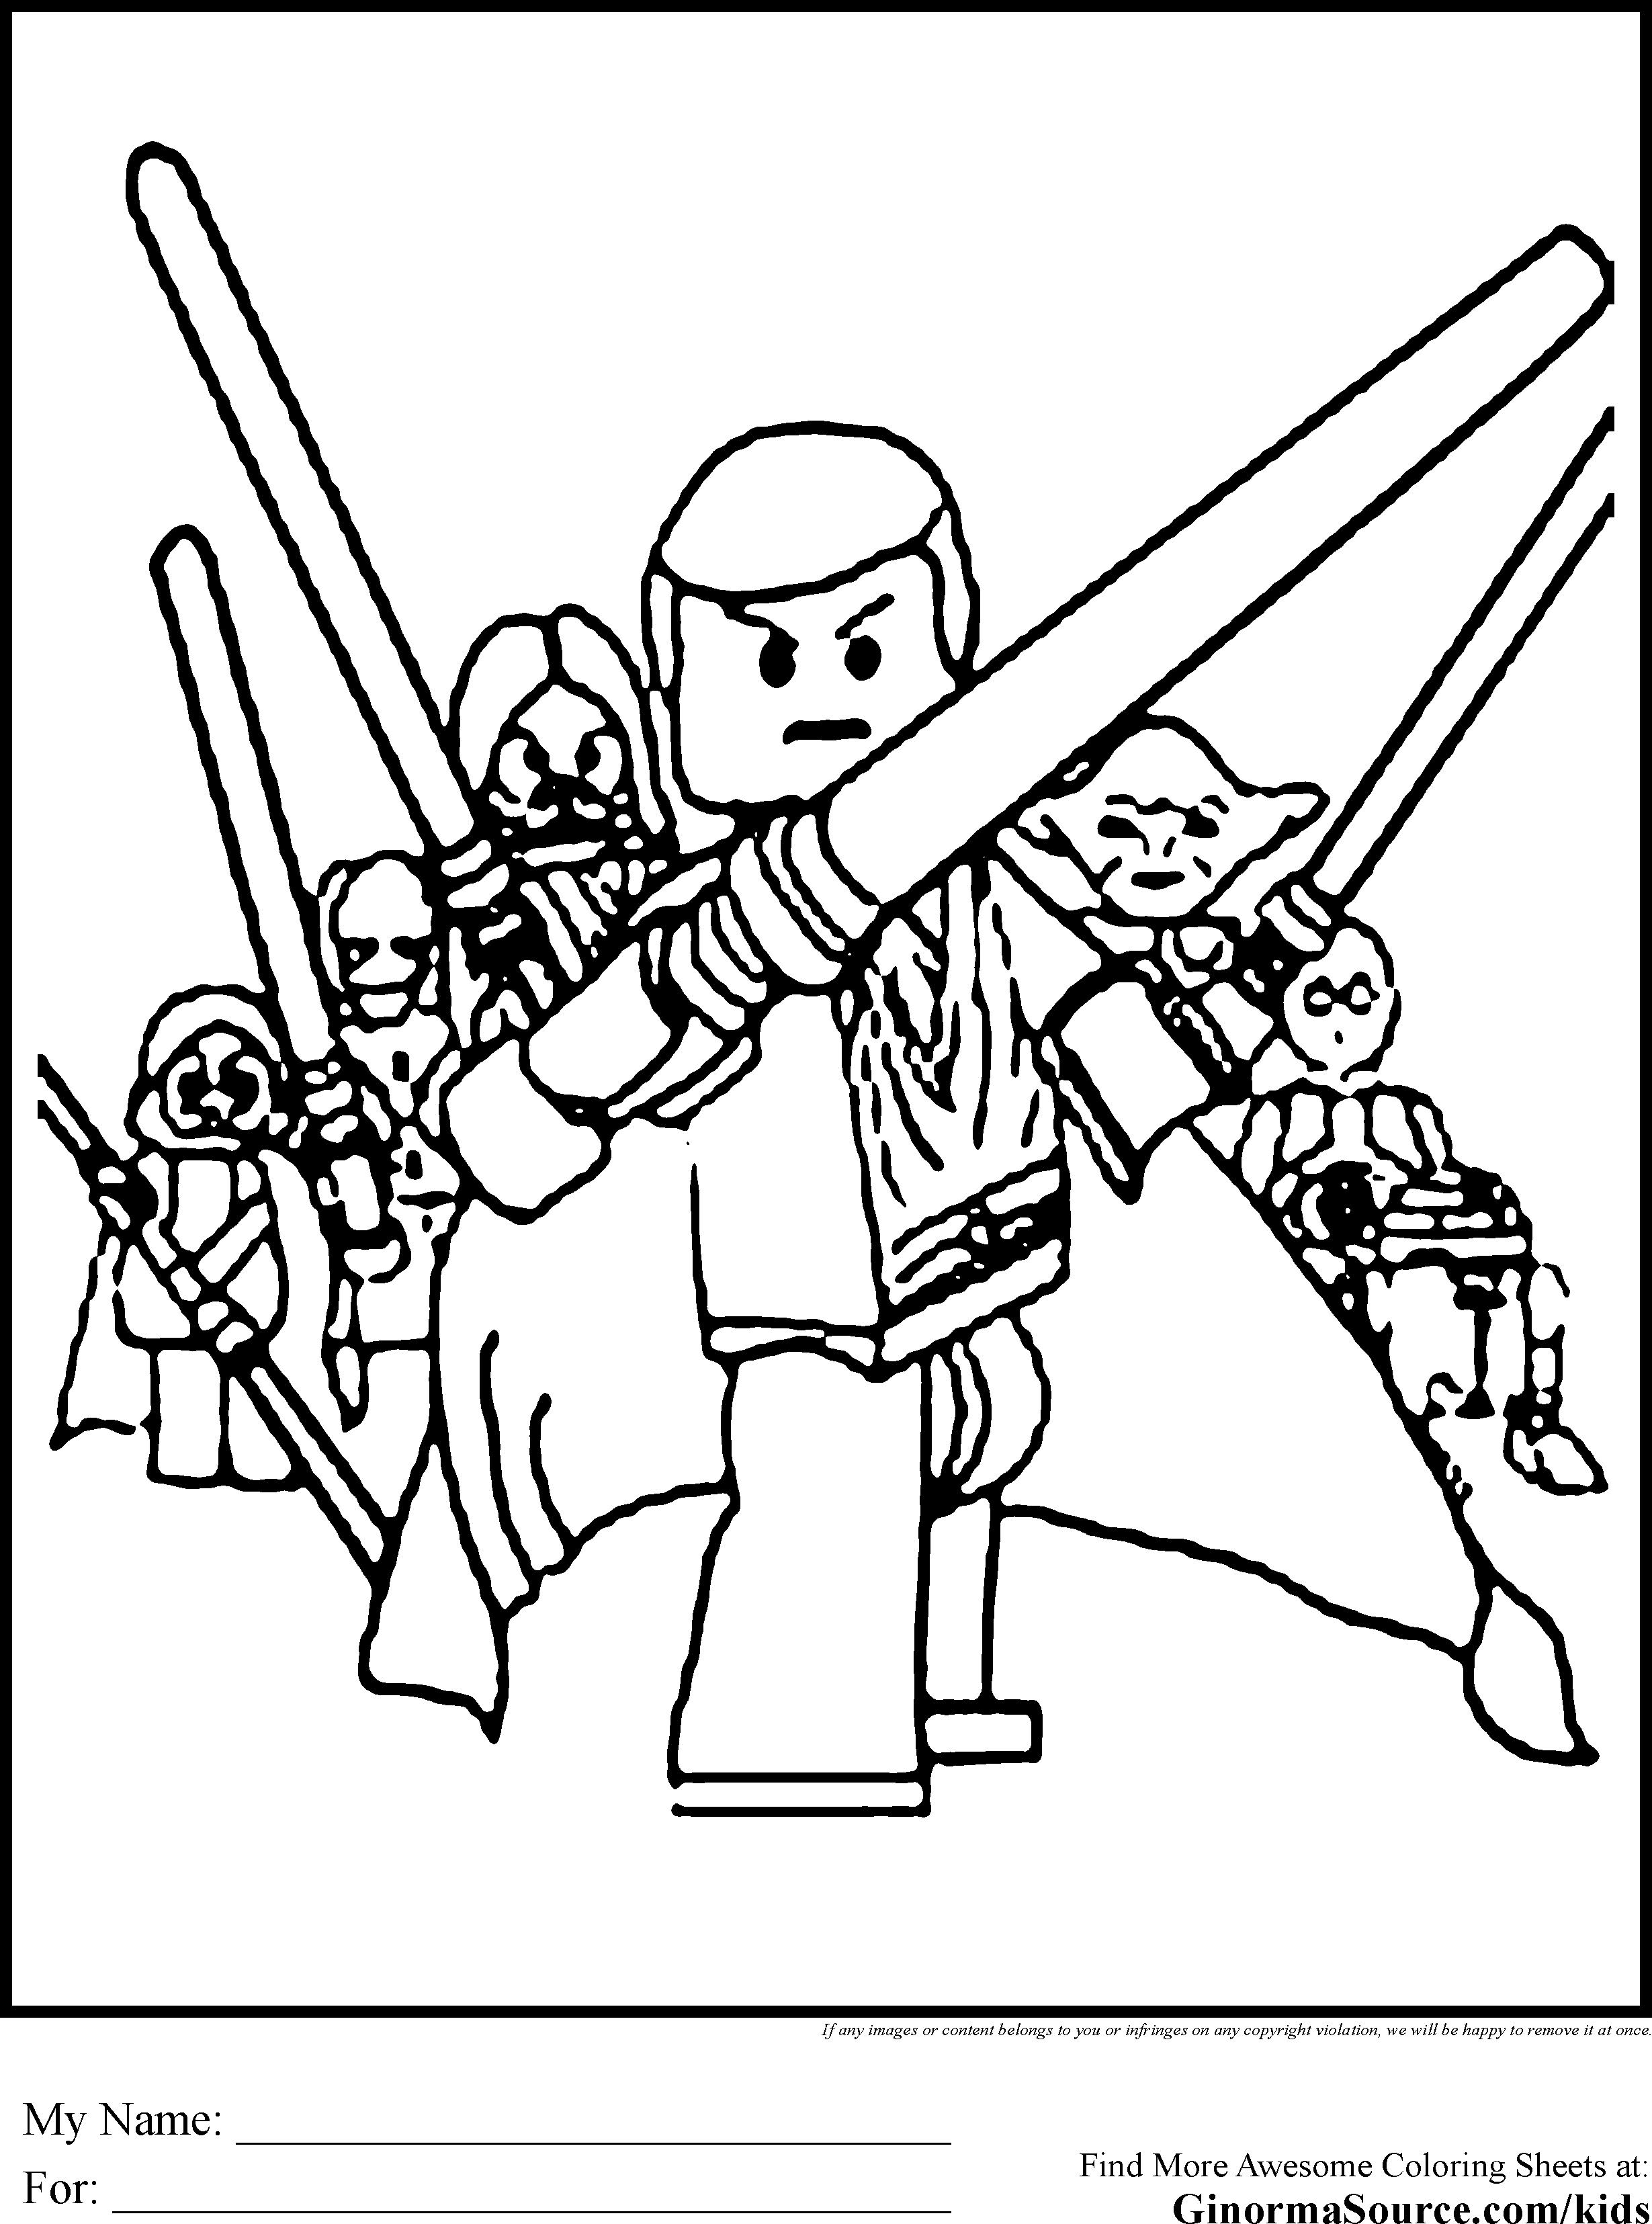 lego star wars coloring sheet create your own lego coloring pages for kids sheet star lego coloring wars 